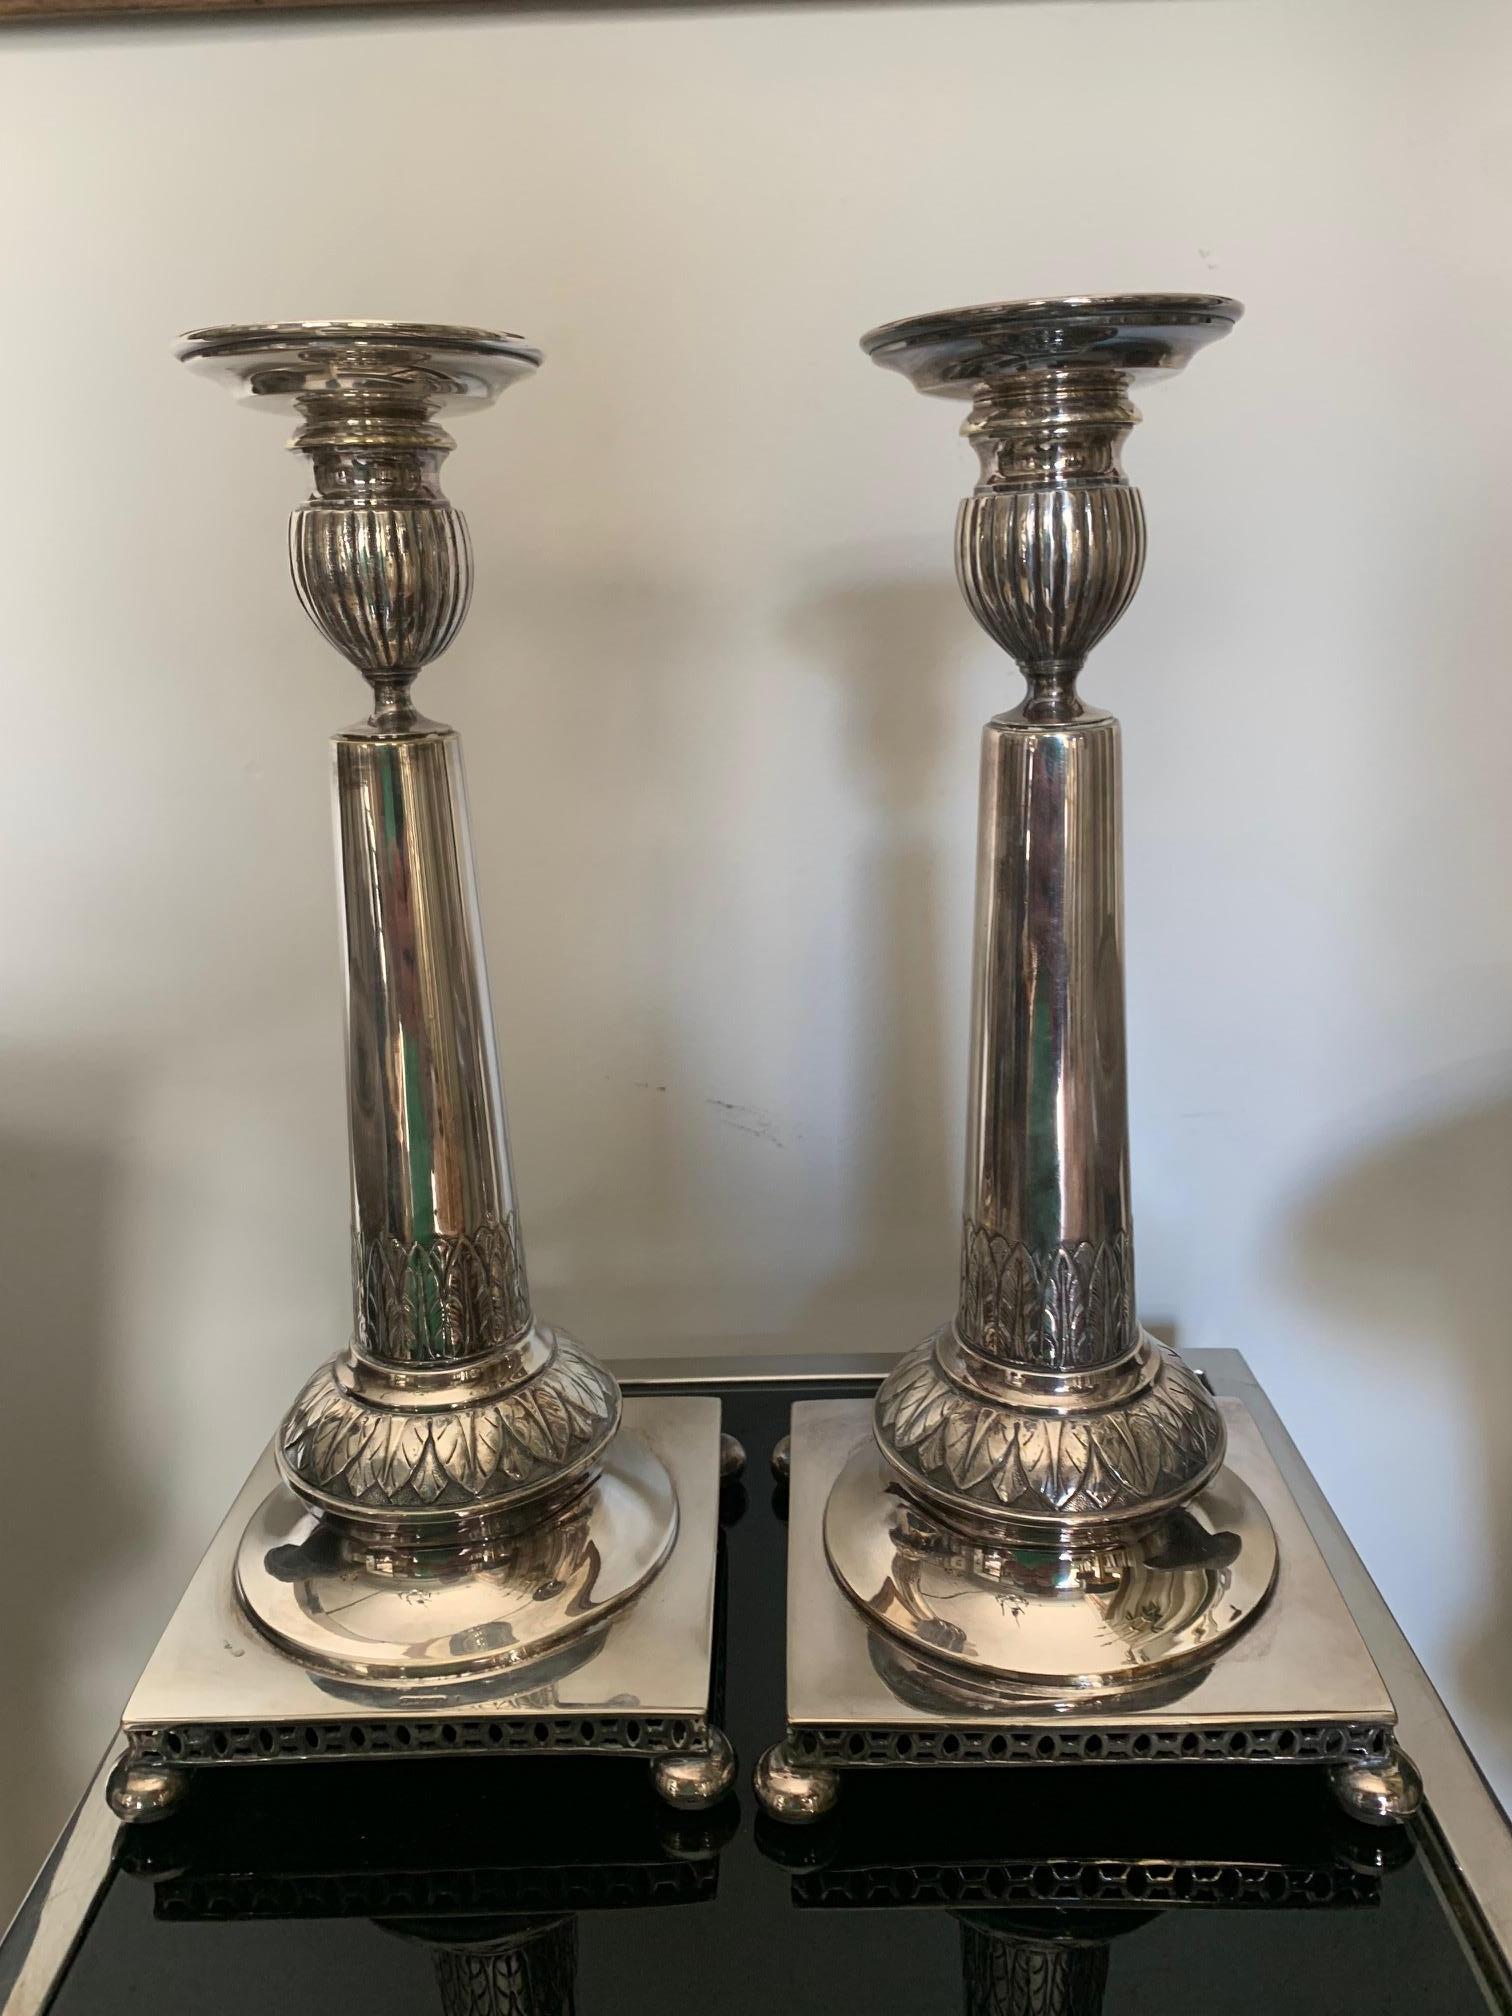 Pair of candlesticks in neoclassical silver, decorated with leaves, square base perforated, beginning XX .The condition is good, although one of them has a small mark on the base.